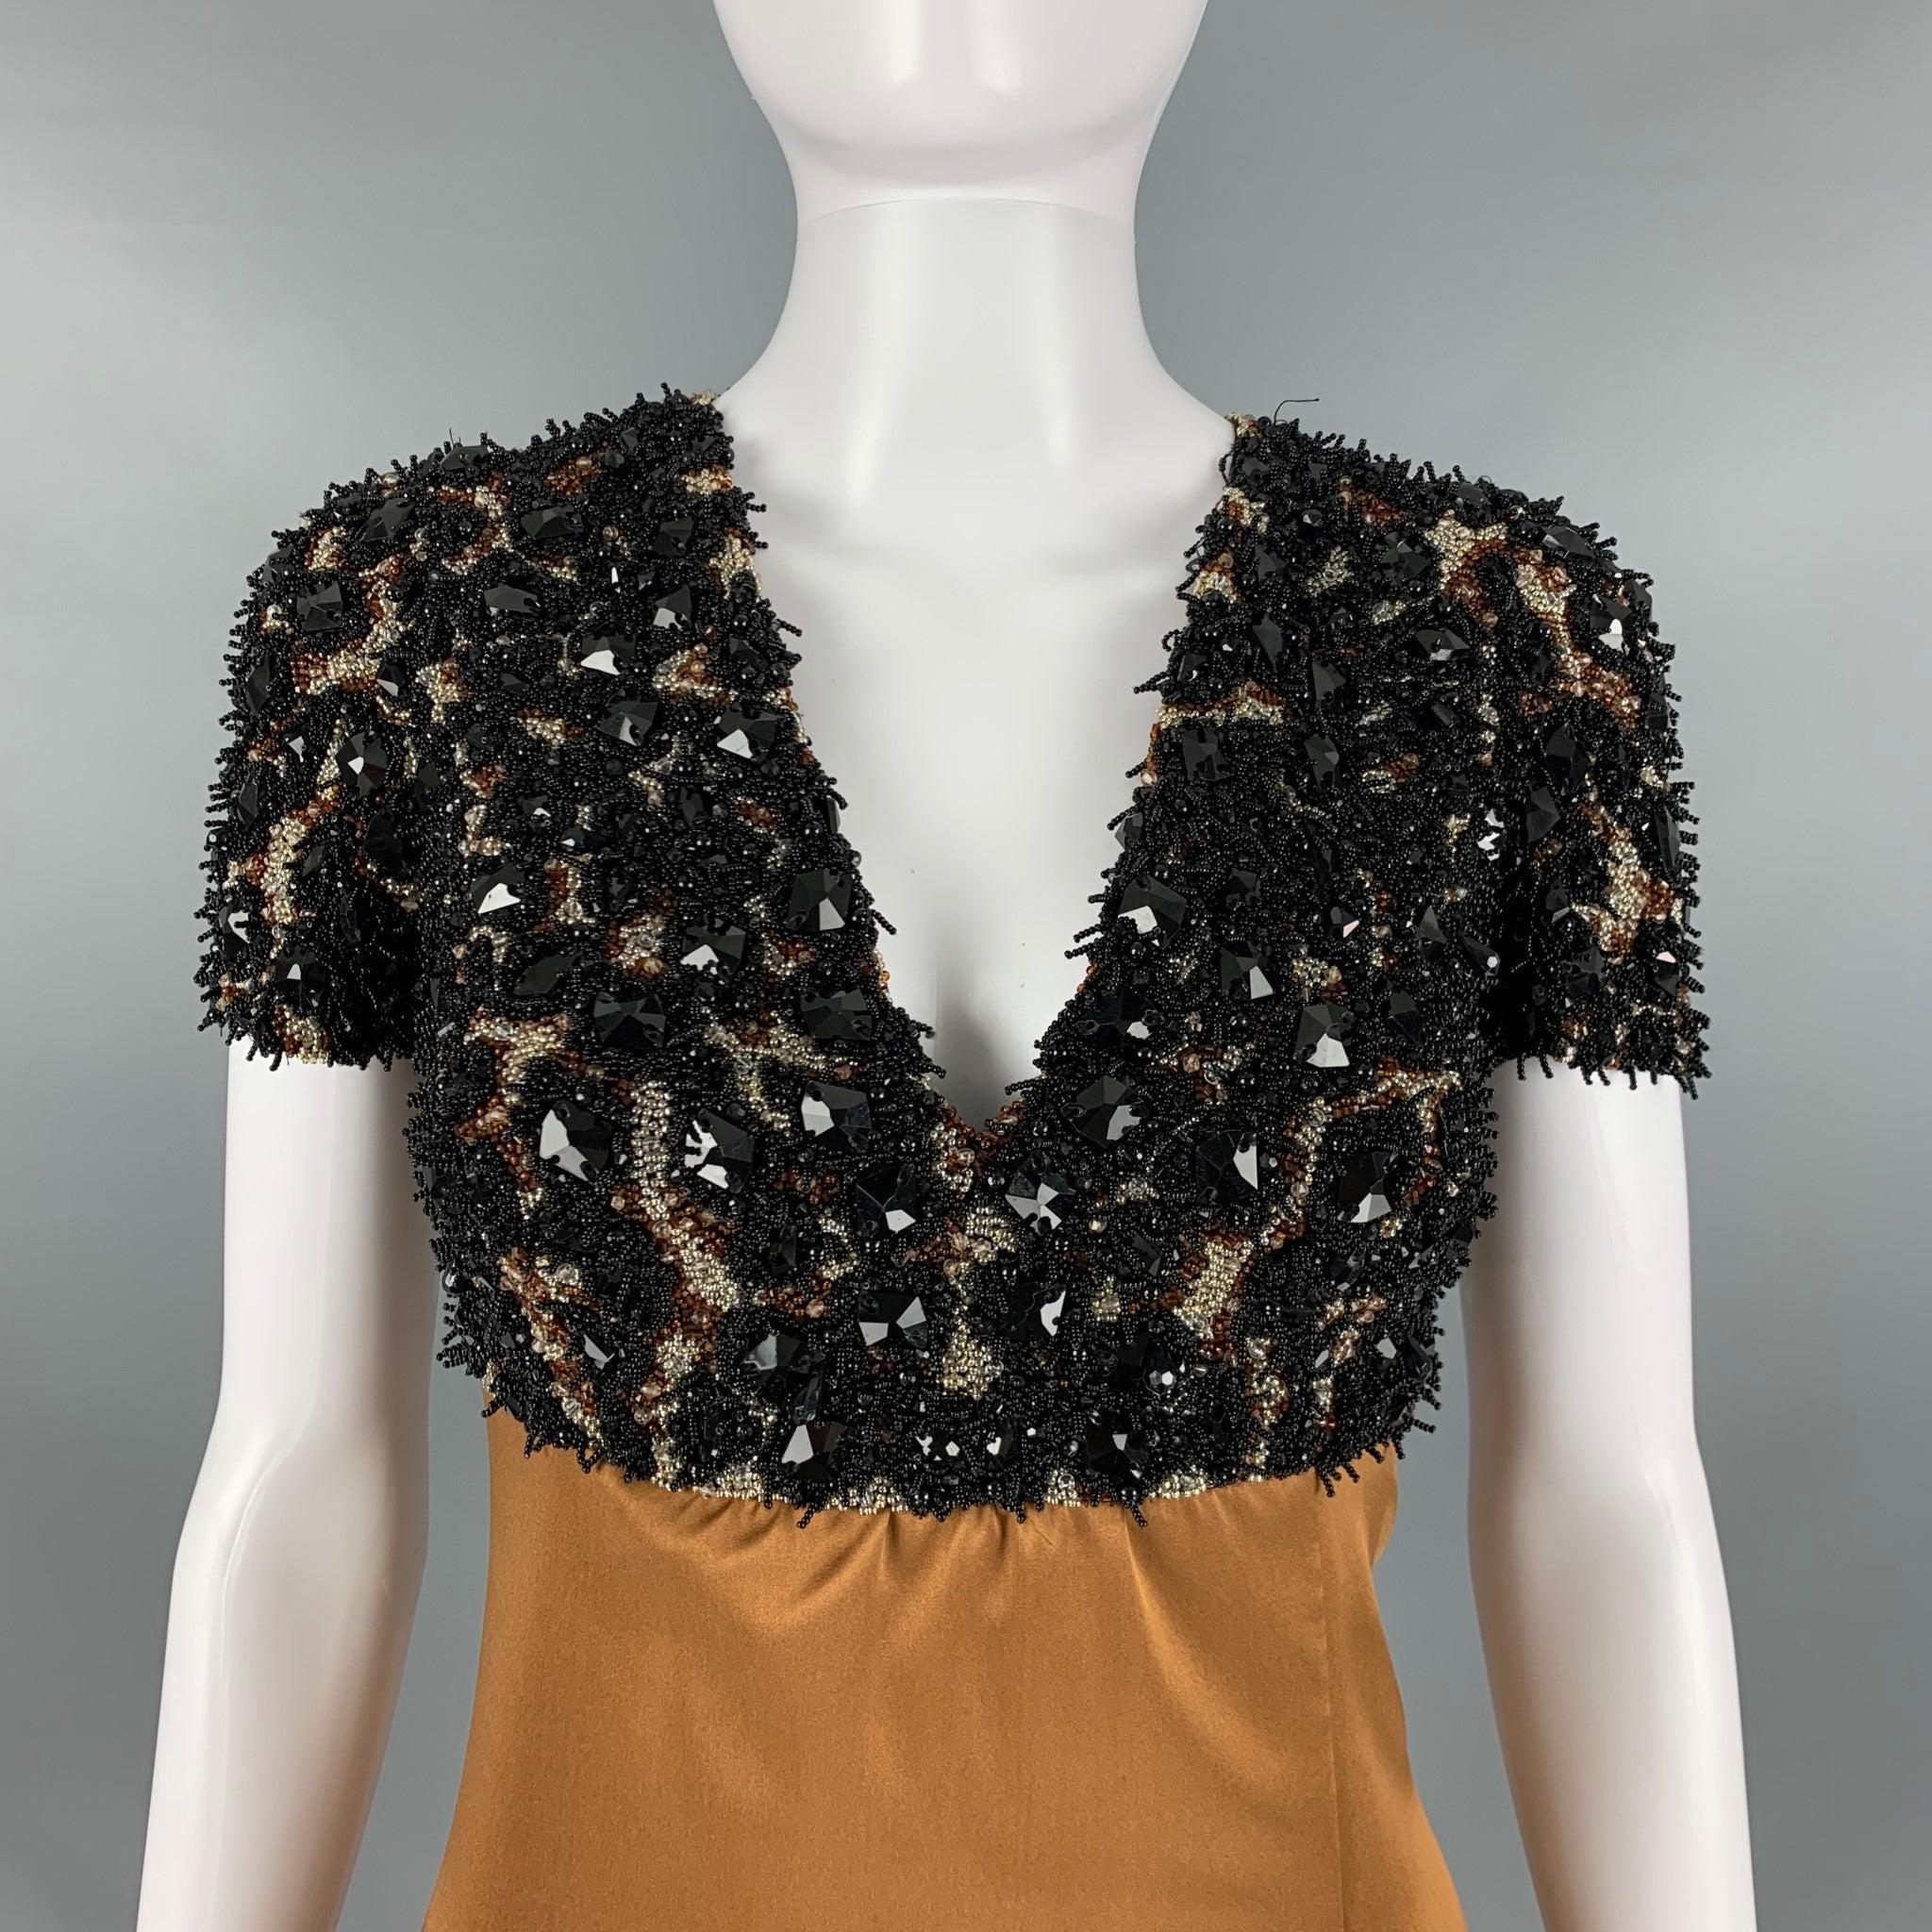 BURBERRY PRORSUM Pre-Fall 2013 evening gown comes in a brown camel silk woven material featuring an empress silhouette, beaded and crystal accents, front slit, and a back zip up closure. Made in Italy. Excellent Pre-Owned Conditions.
With tags and